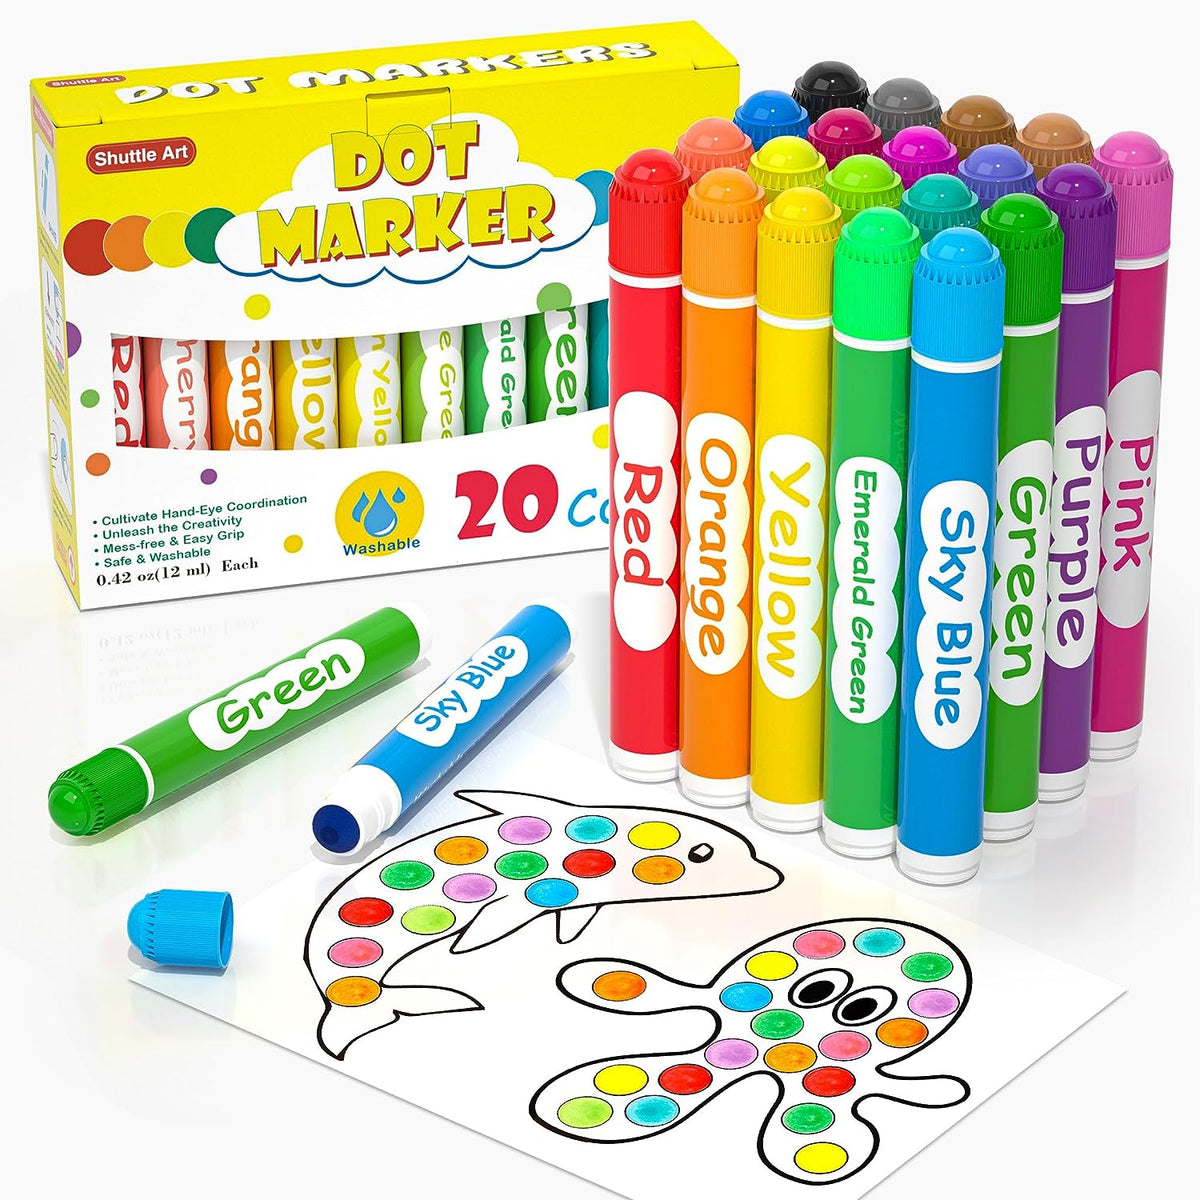 Shuttle Art Dot Markers, 15 Colors Washable Markers for Toddlers